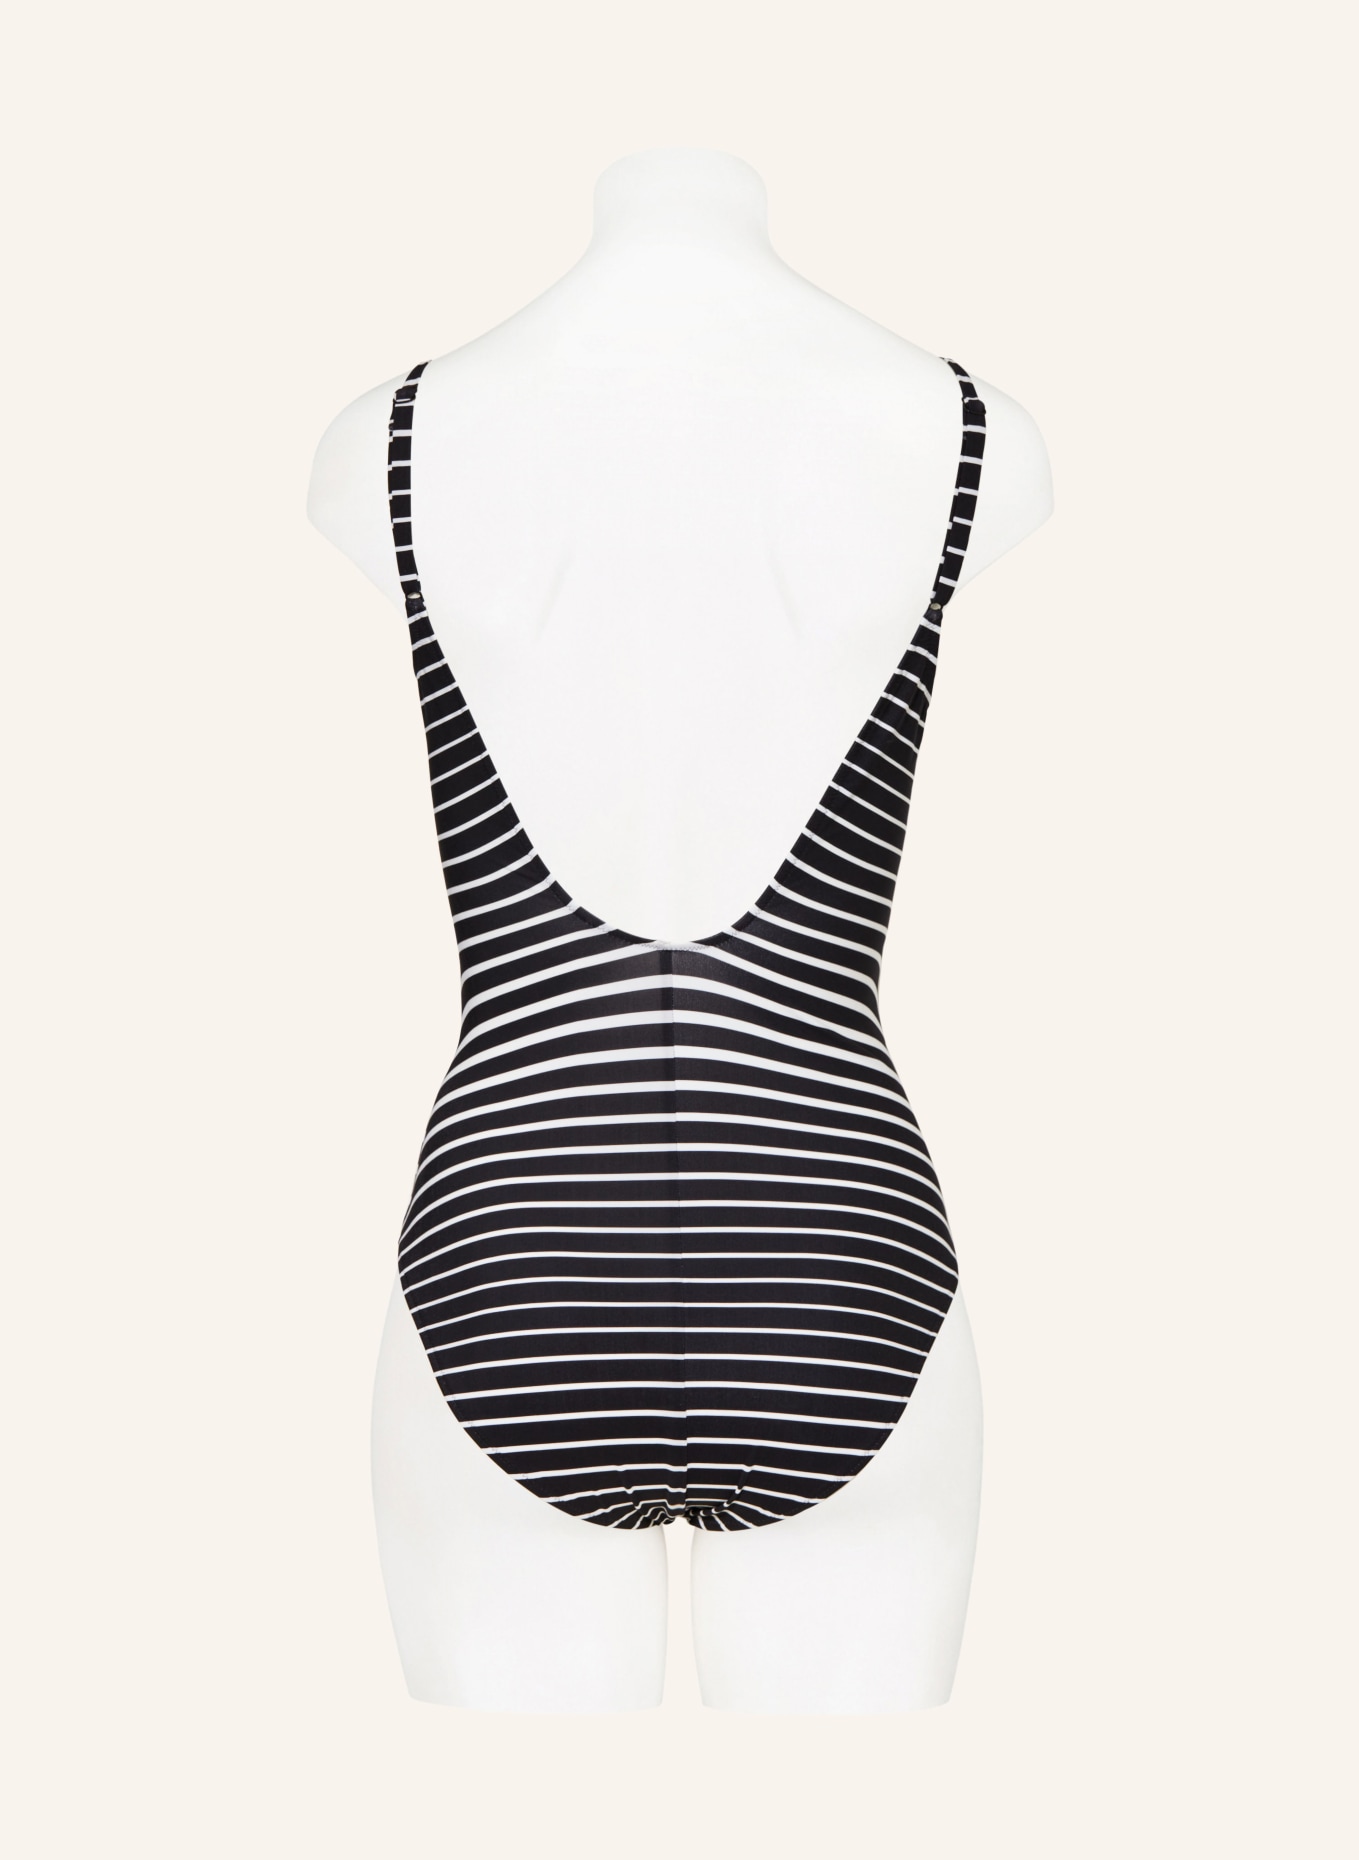 MARYAN MEHLHORN Underwire swimsuit ALLUSIONS, Color: BLACK/ WHITE (Image 3)